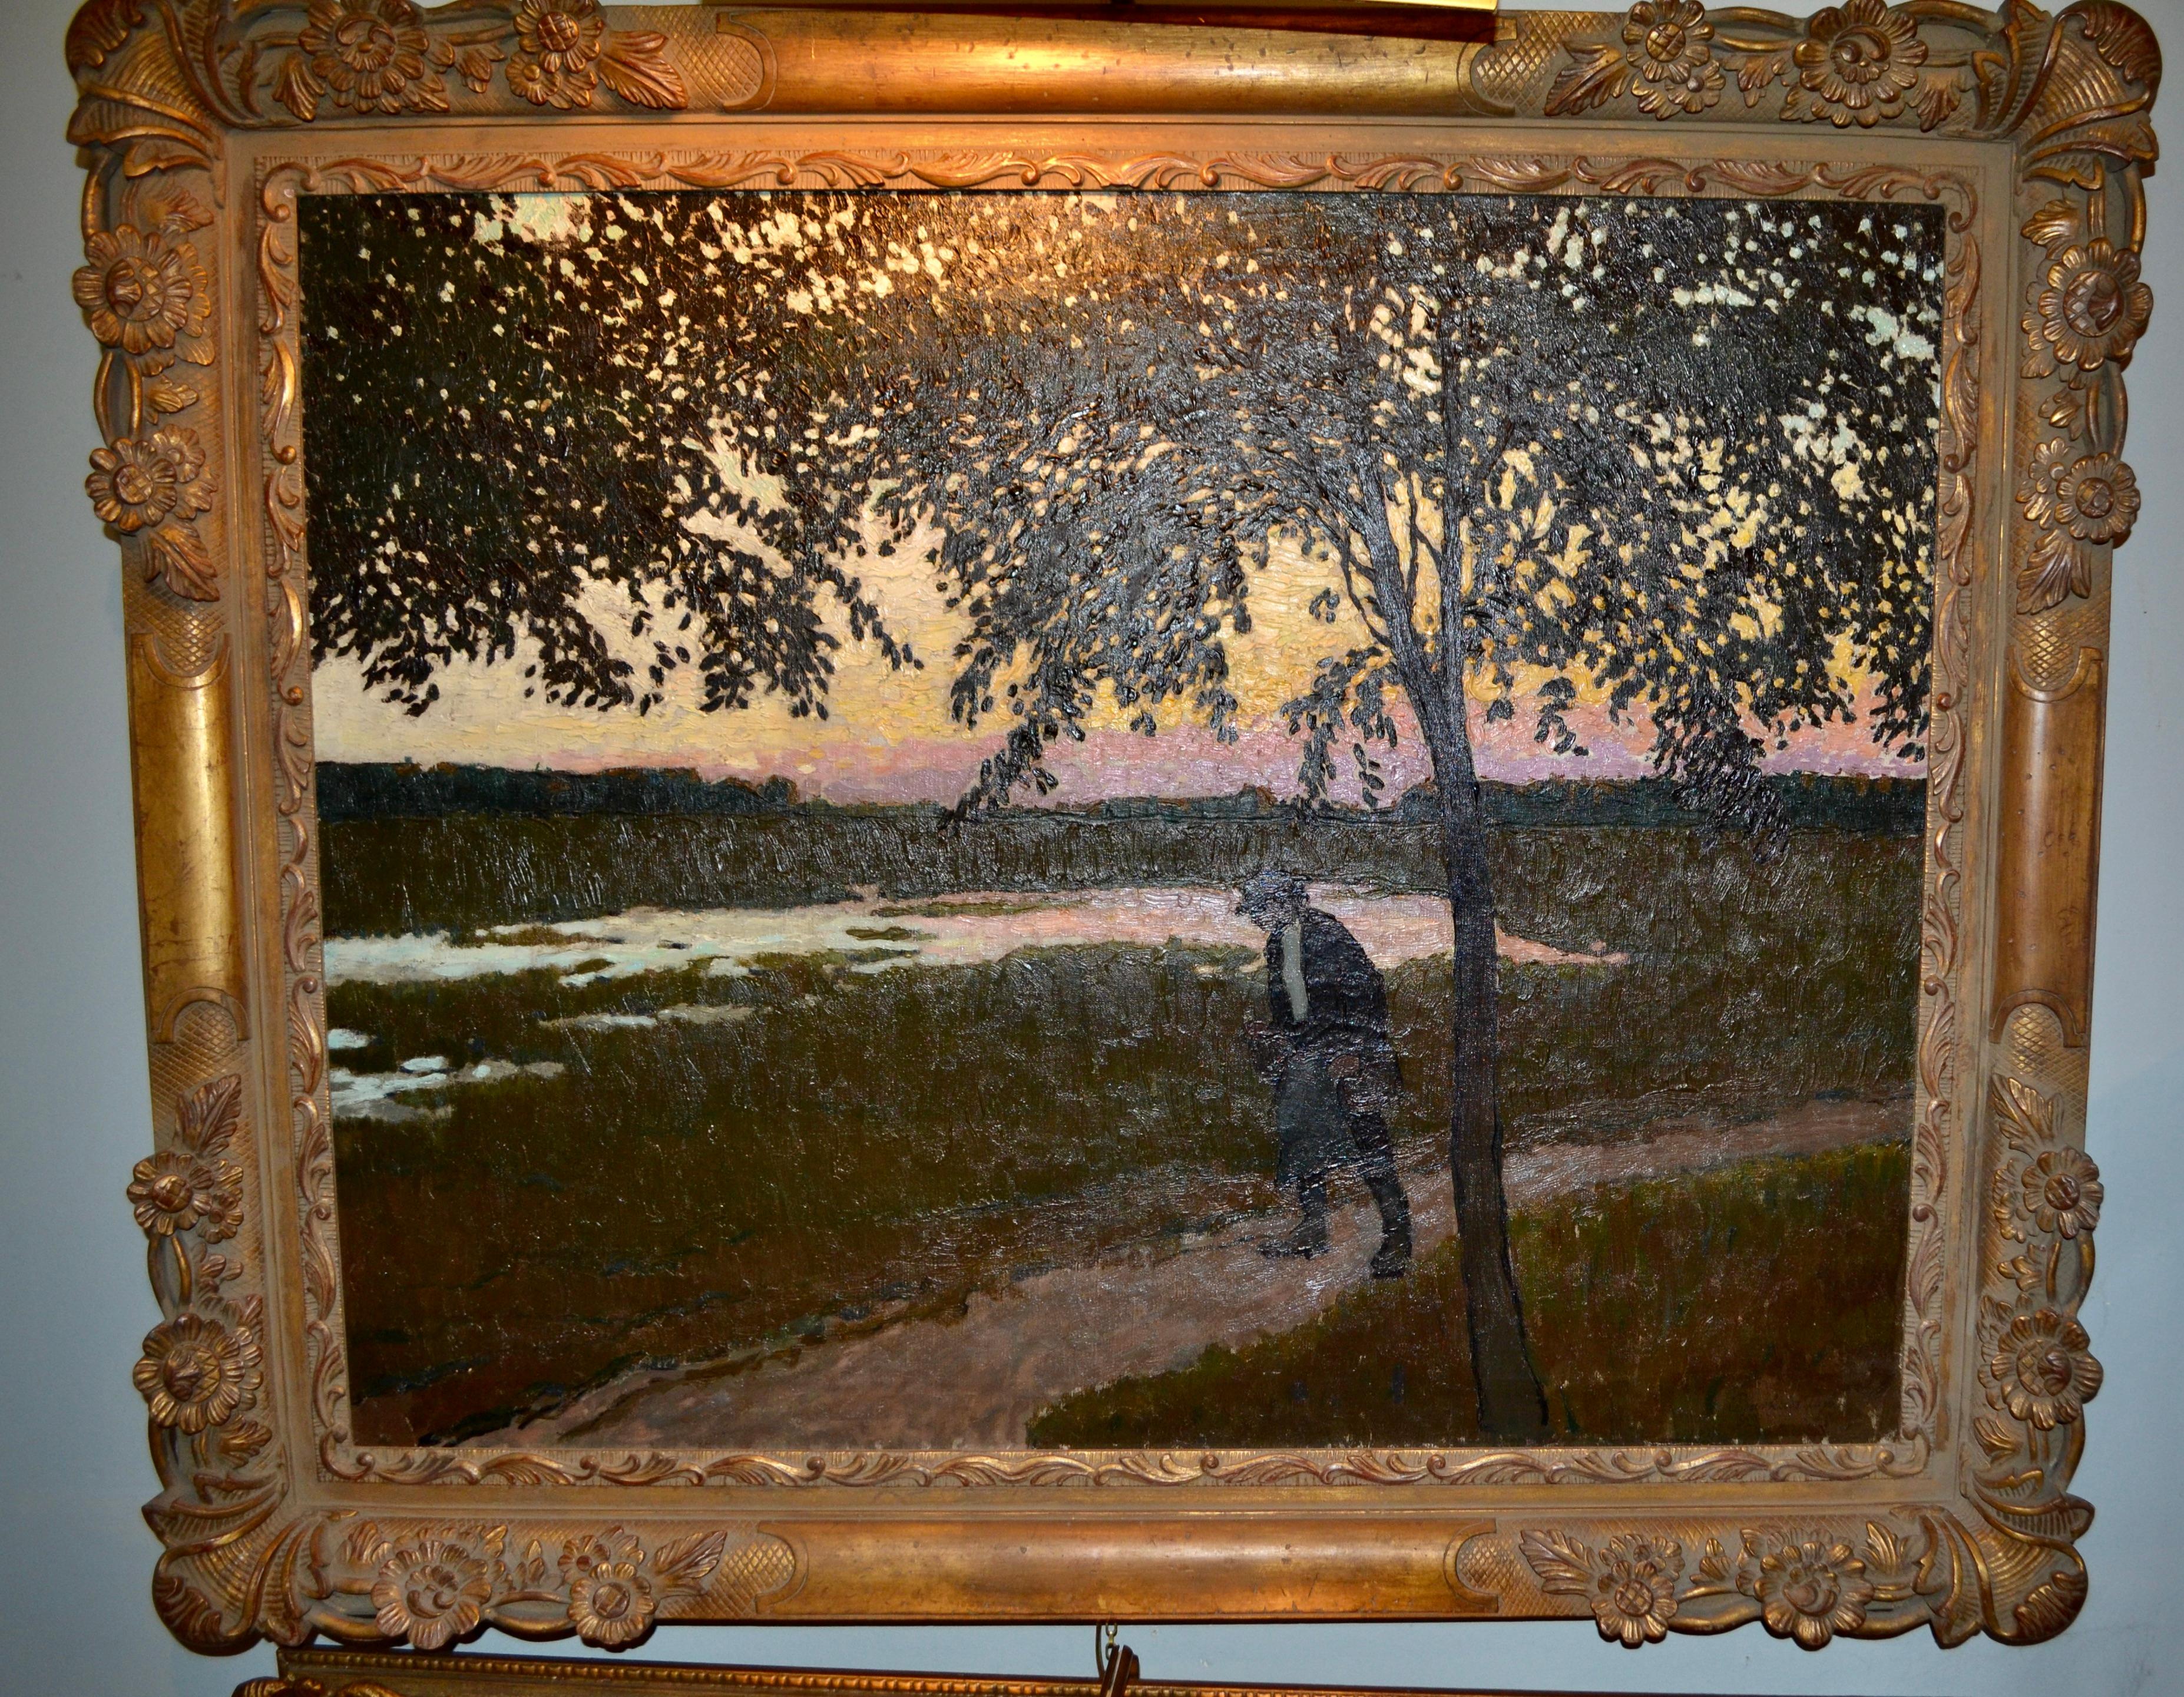 20th Century Impressionist Landscape by Early 20 Century Hungarian Artist Barkasz Lajosbarkaz For Sale